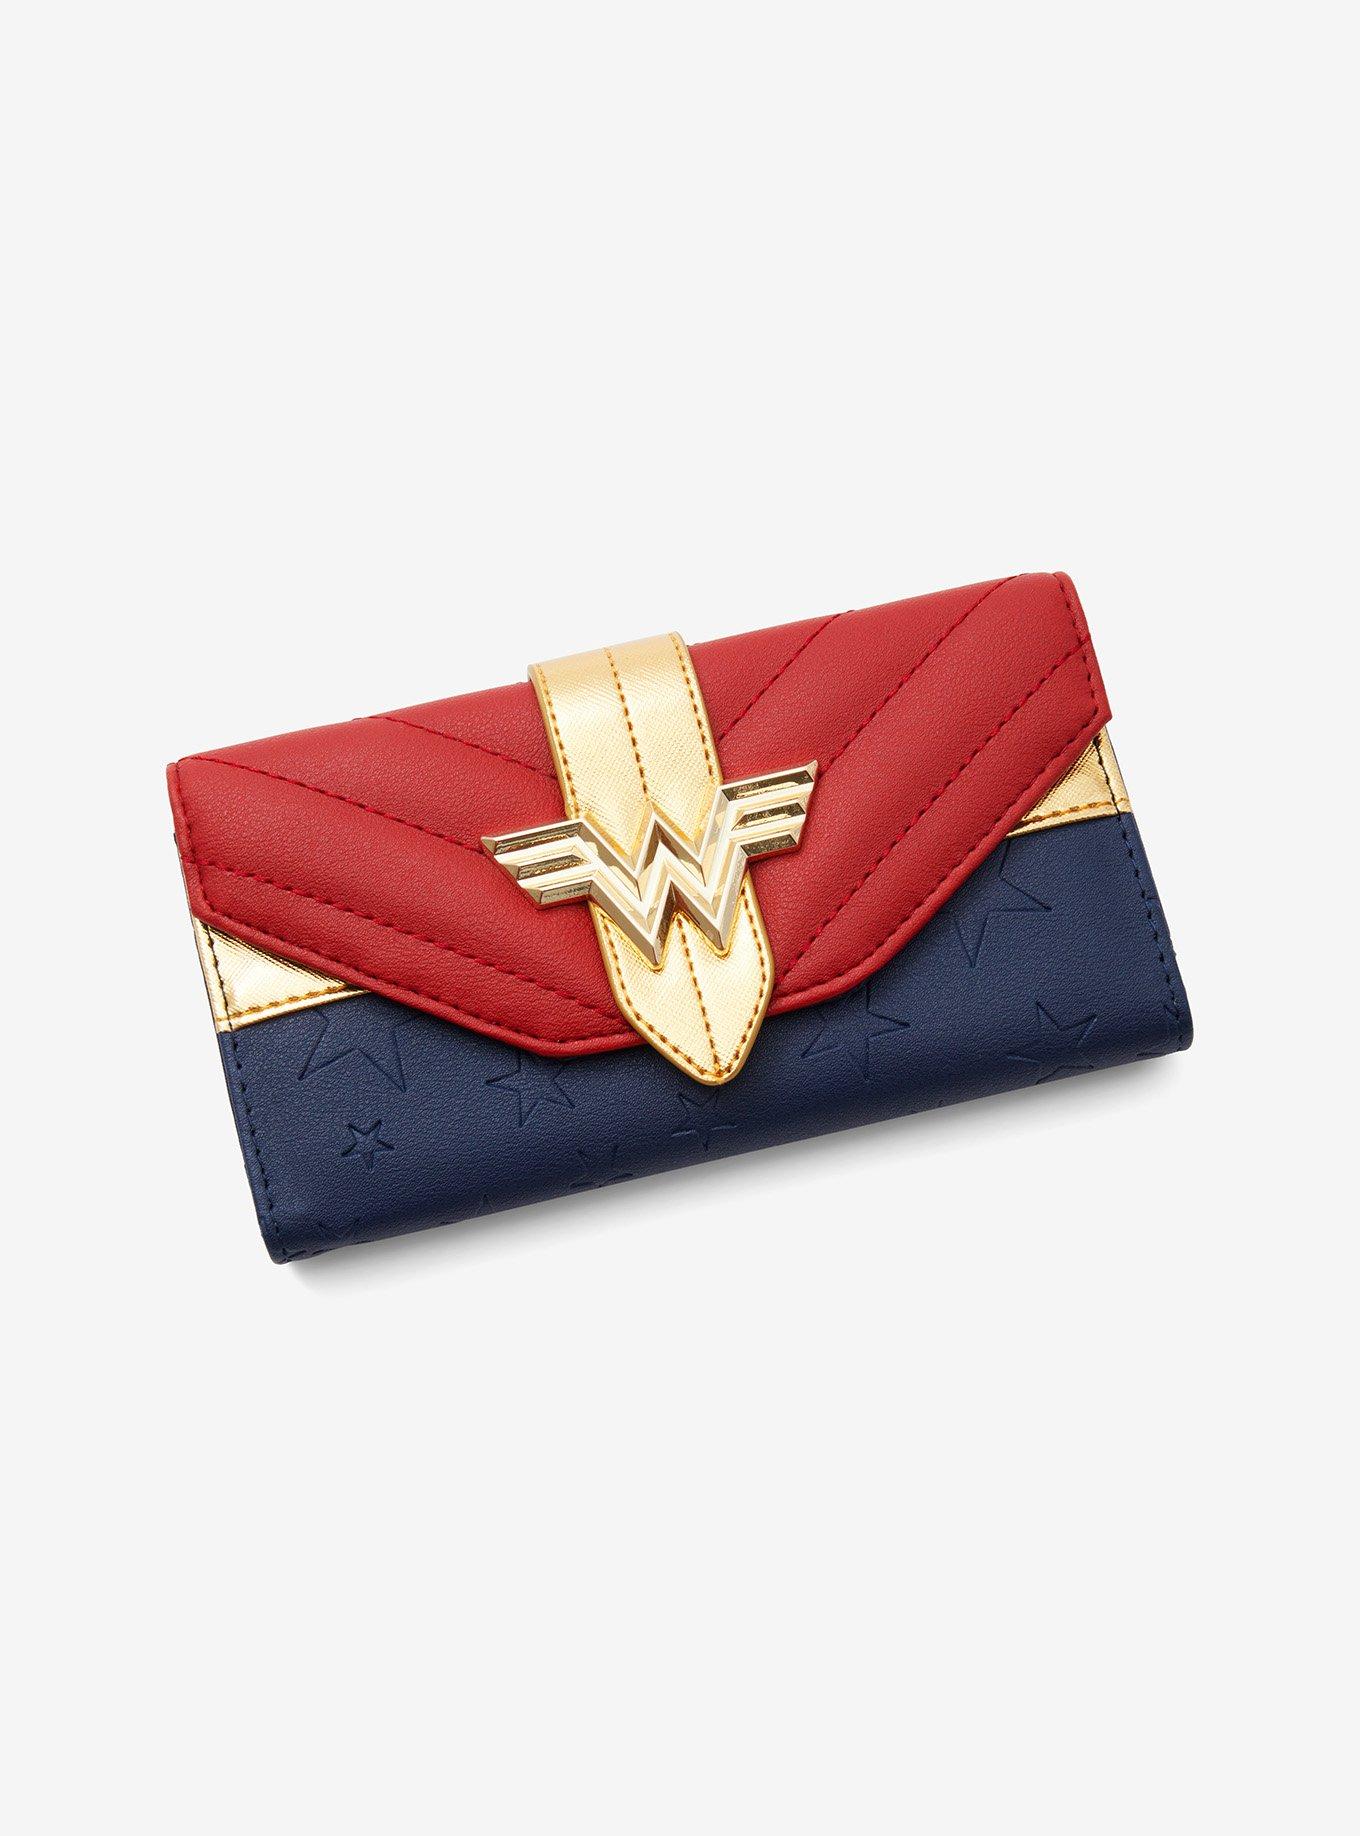 DC Comics Wonder Woman Quilted Flap Wallet | Hot Topic